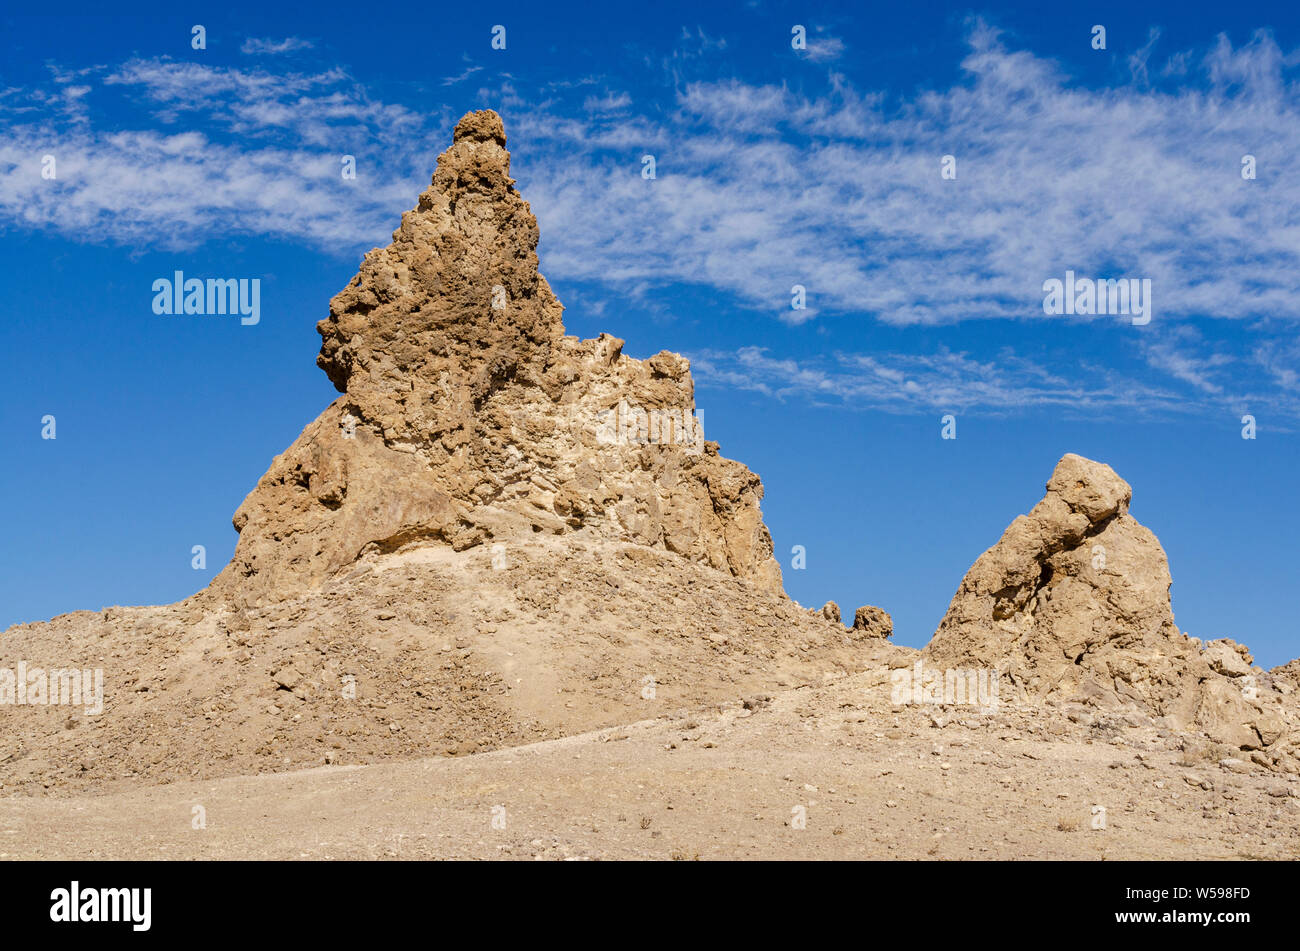 Large and small rock formations next to each other under blue skies Stock Photo